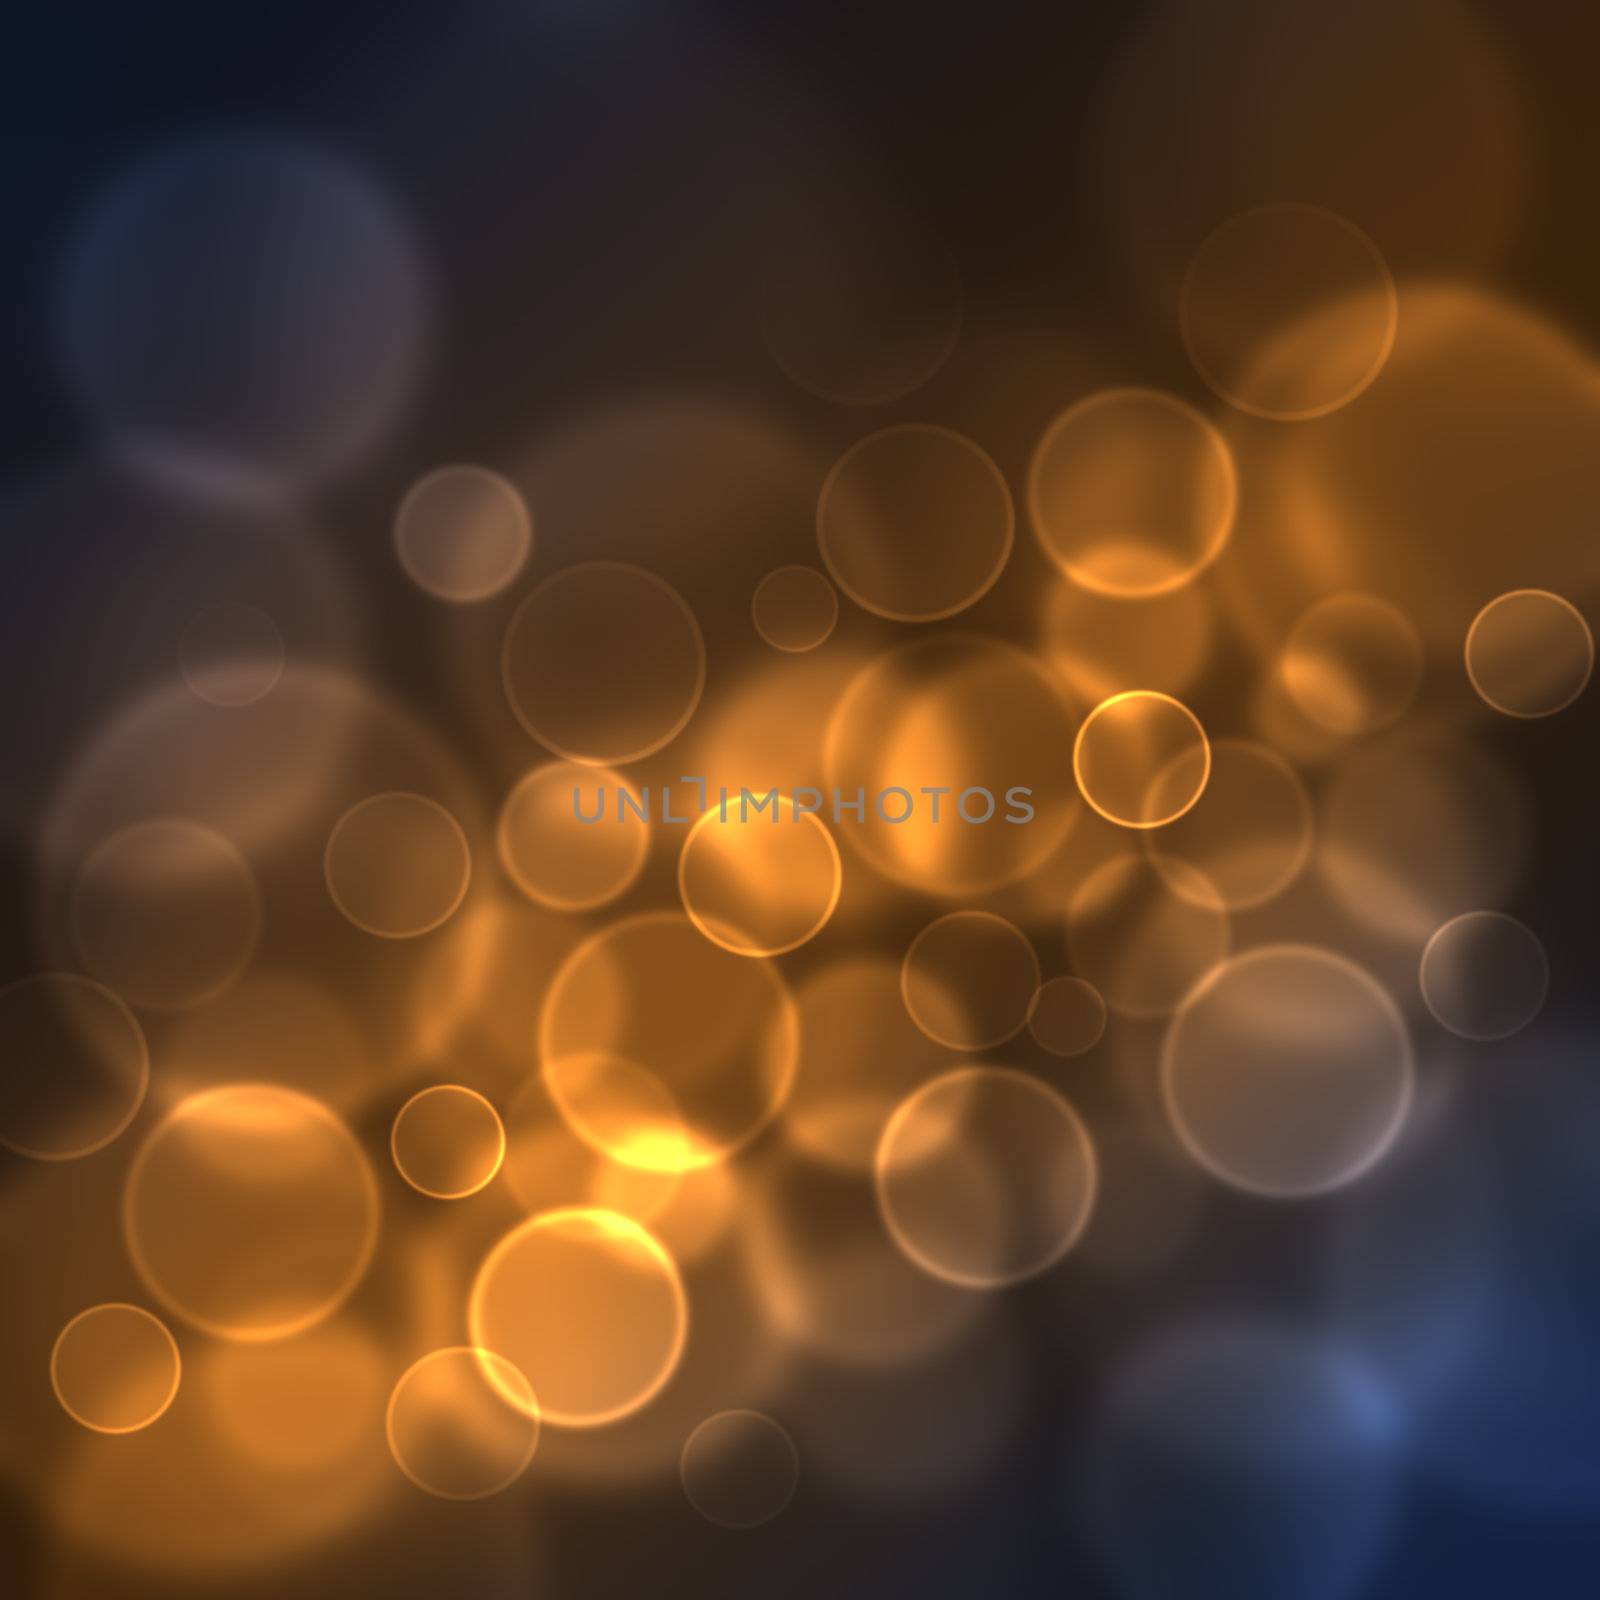 Abstract colored bokeh Background.